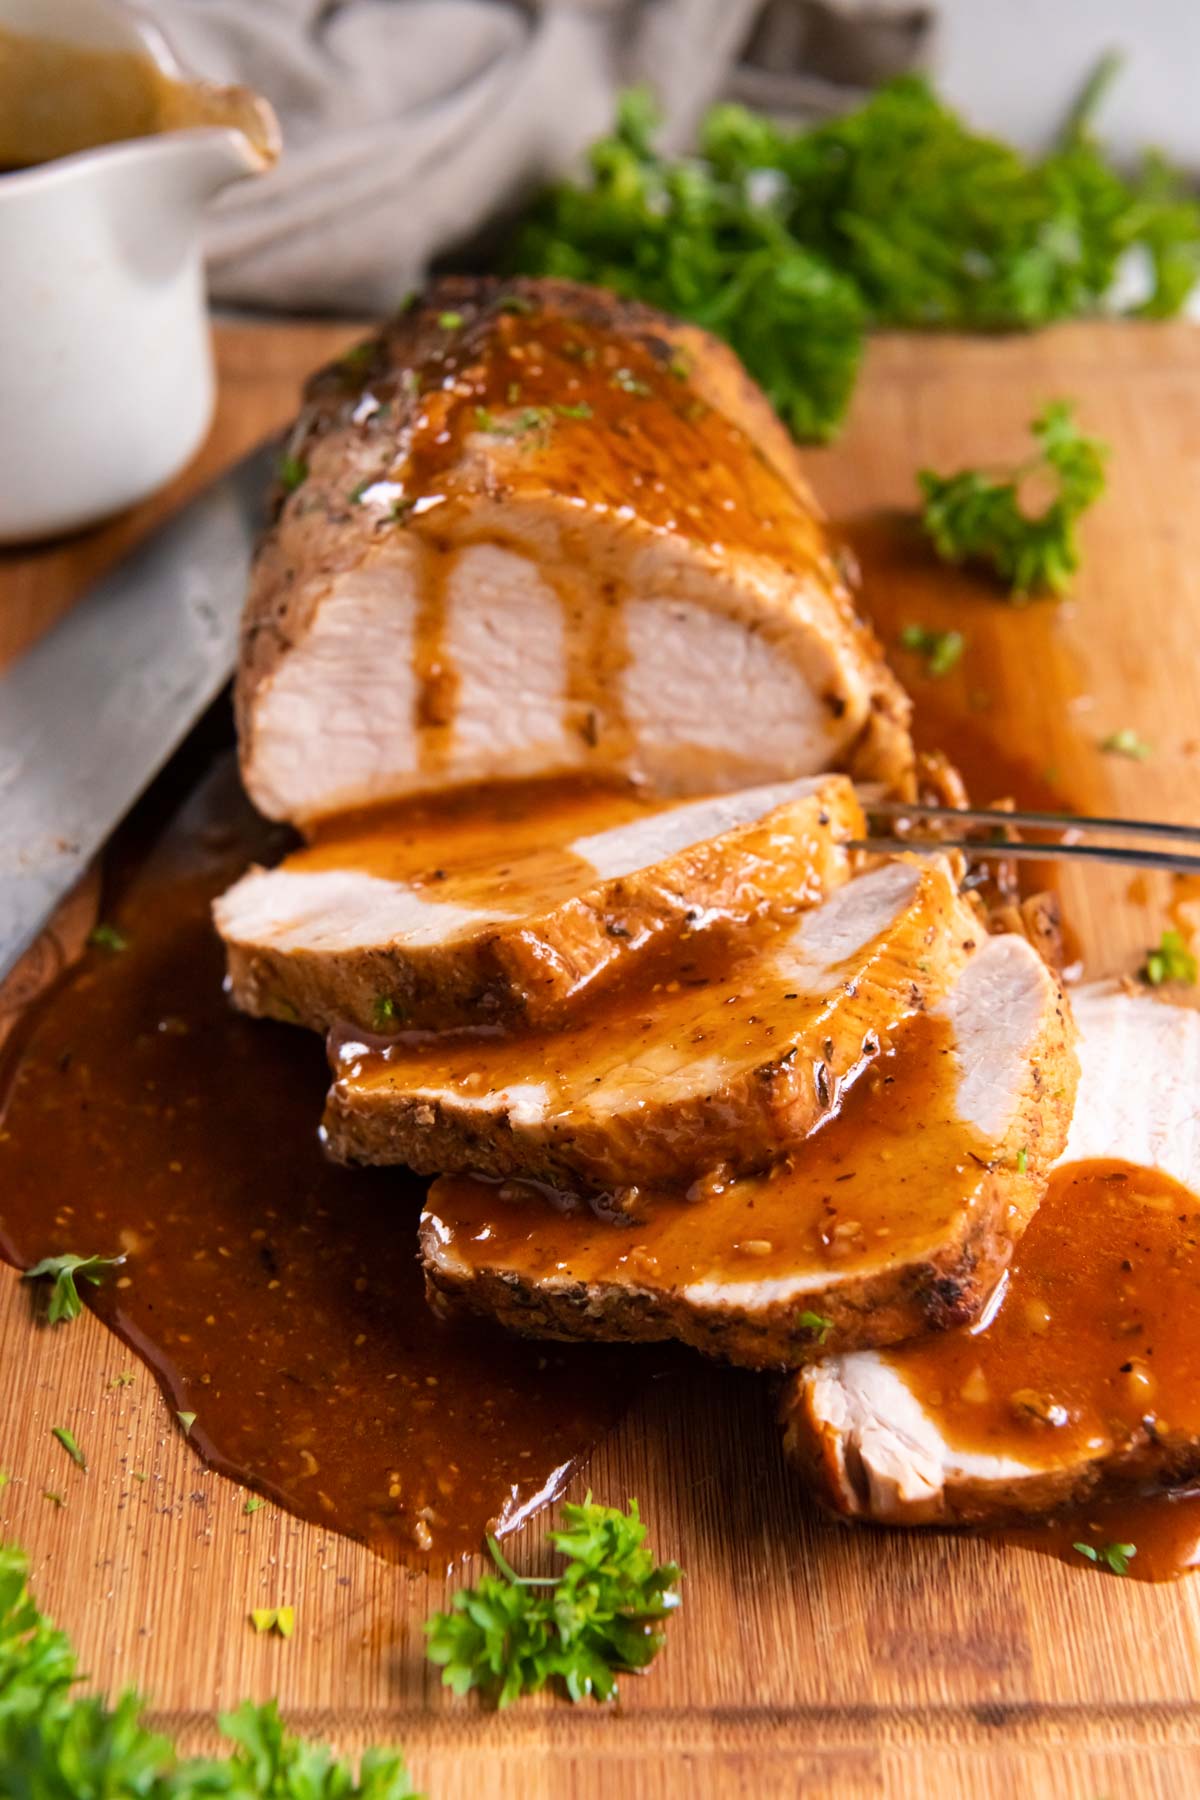 Partially sliced Instant Pot pork loin with gravy drizzled over it.